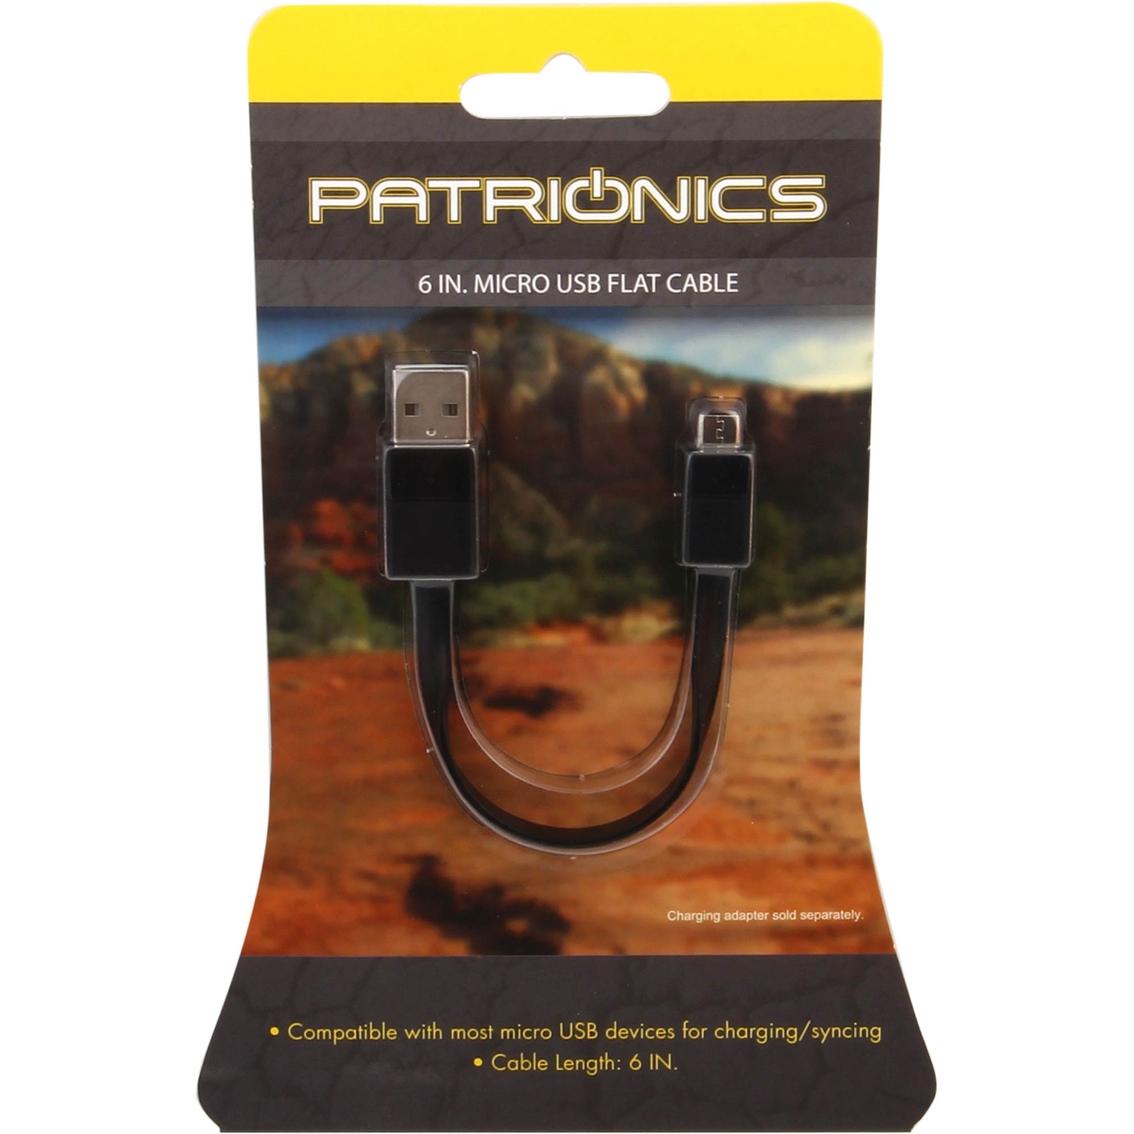 Patrionics Flat Micro USB Cable 6in - Image 2 of 2